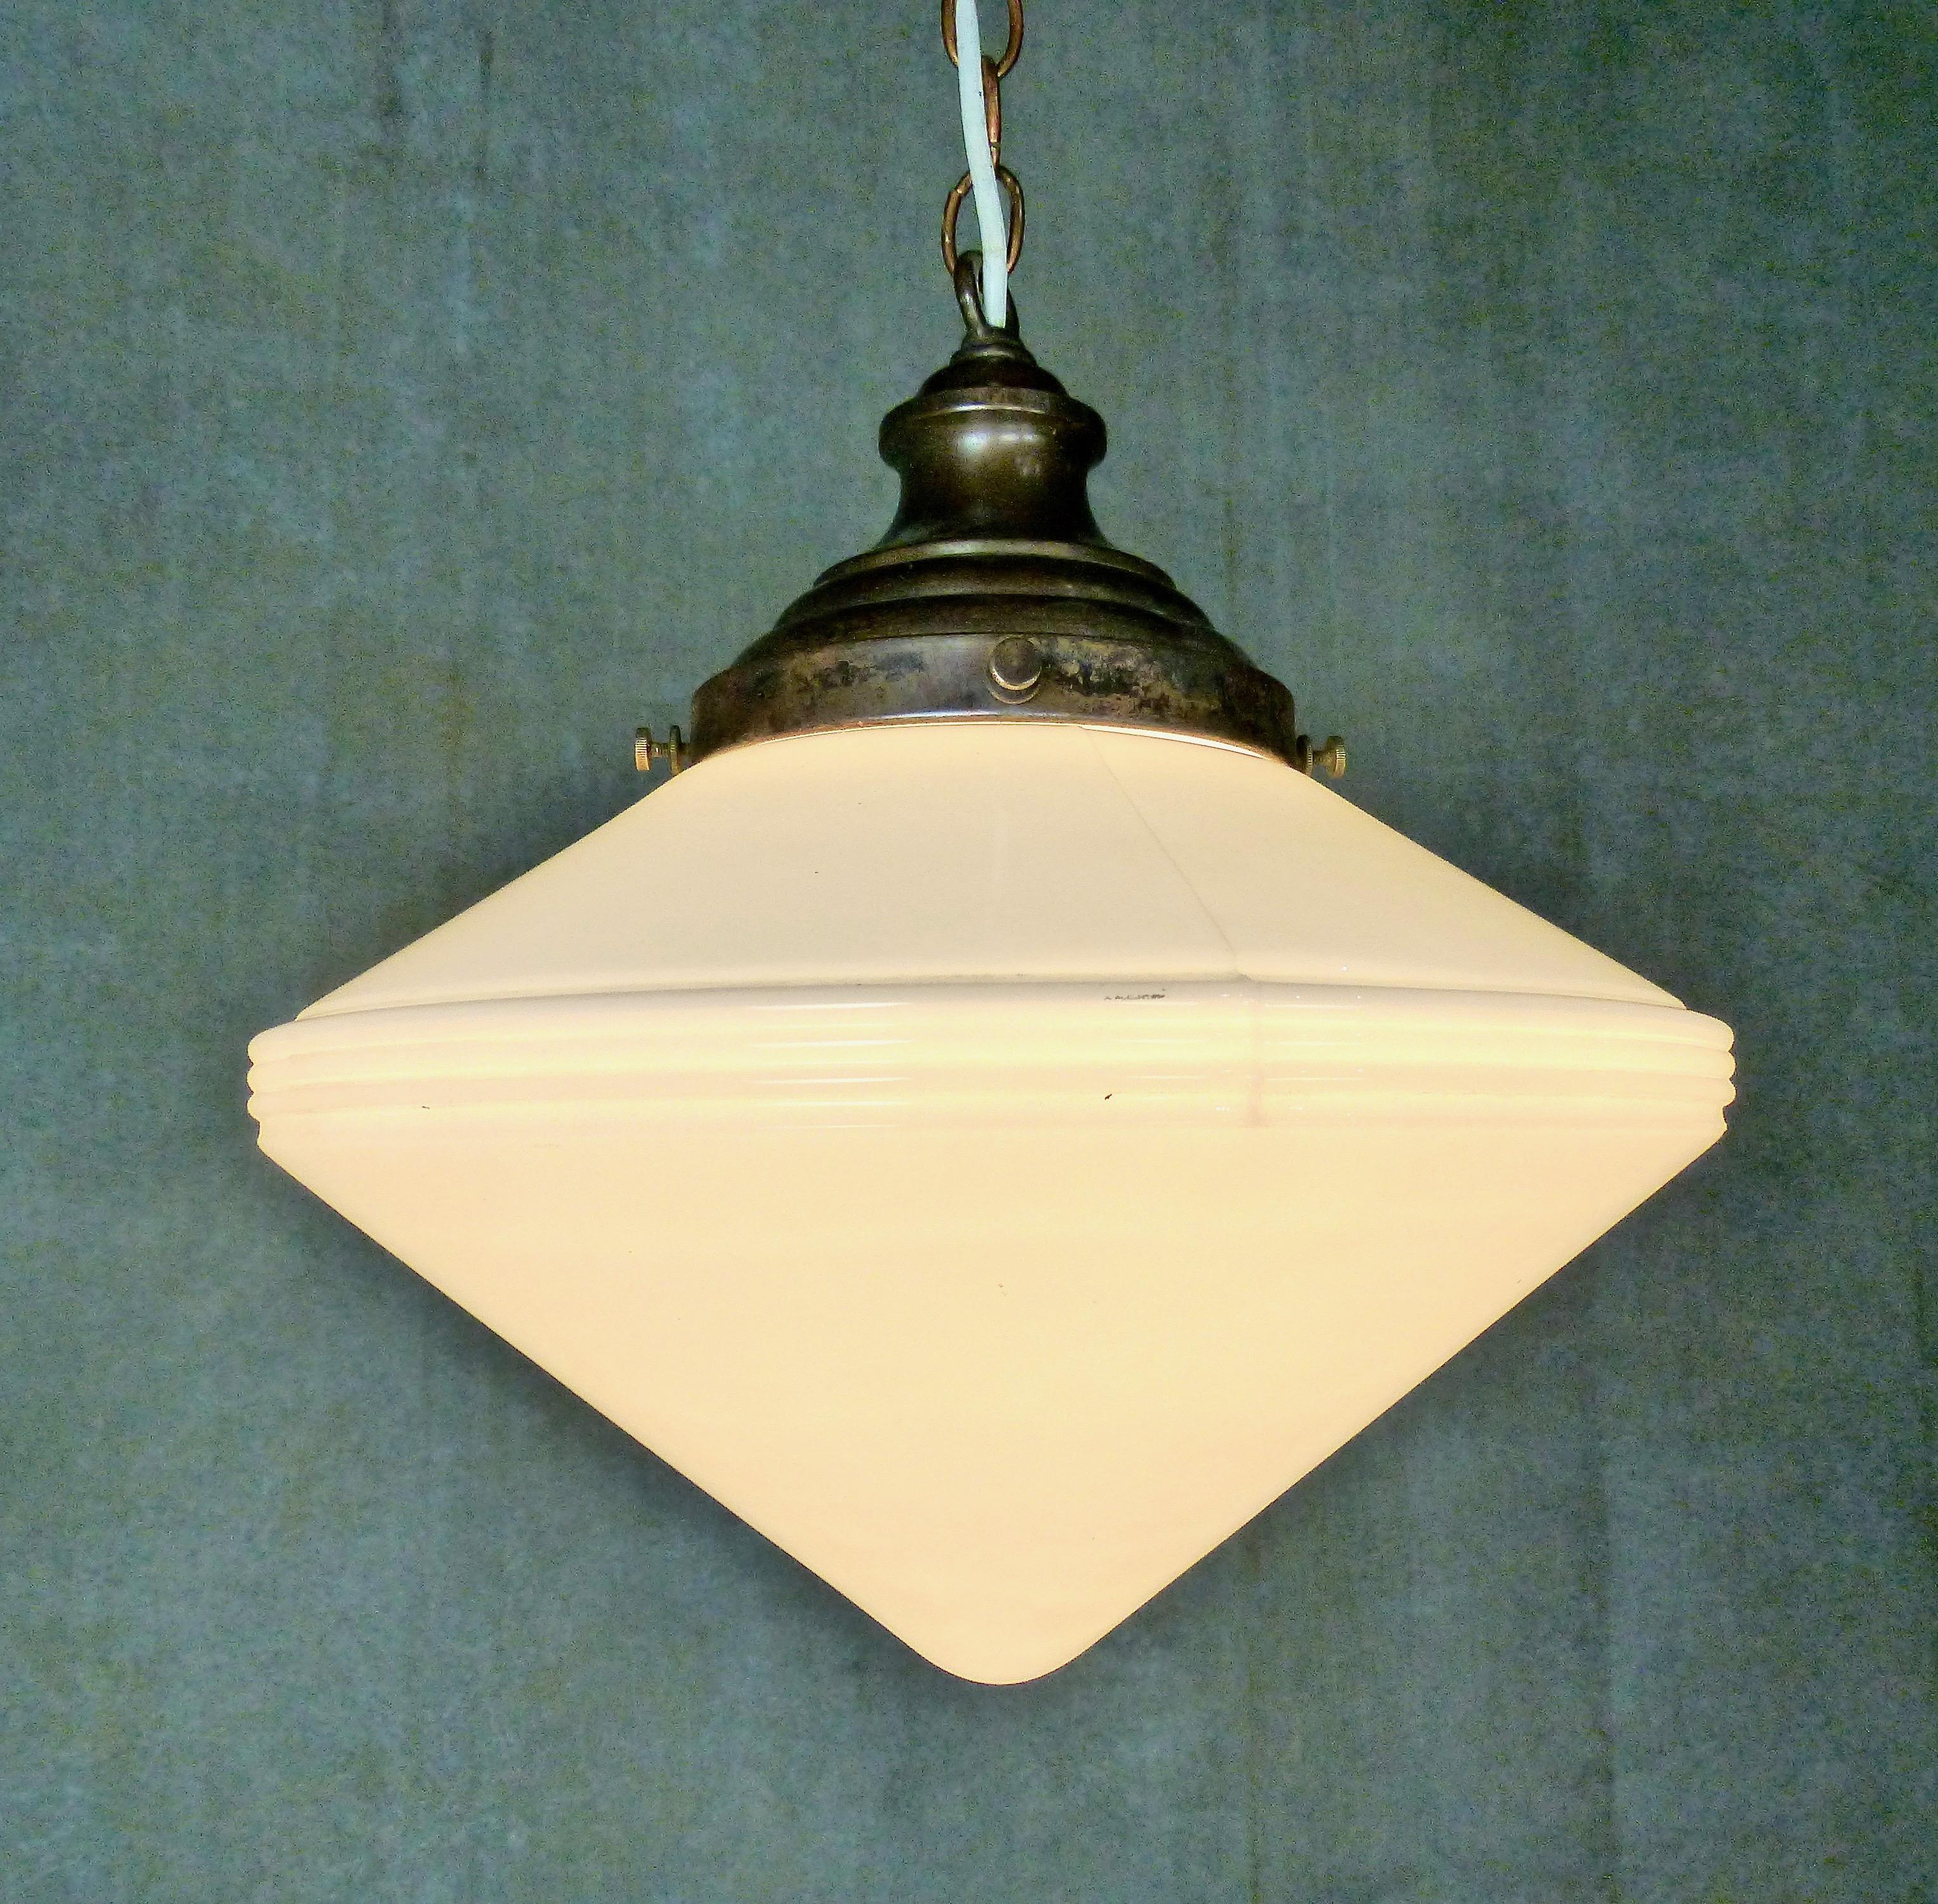 Double pyramid-shaped milk glass shade with a ribbed center band. Original copper fitter on an intriguing pendant light. Re-wired and CSA approved to current electrical standards; ceiling mounting plate included. Currently hangs at 36” but could be